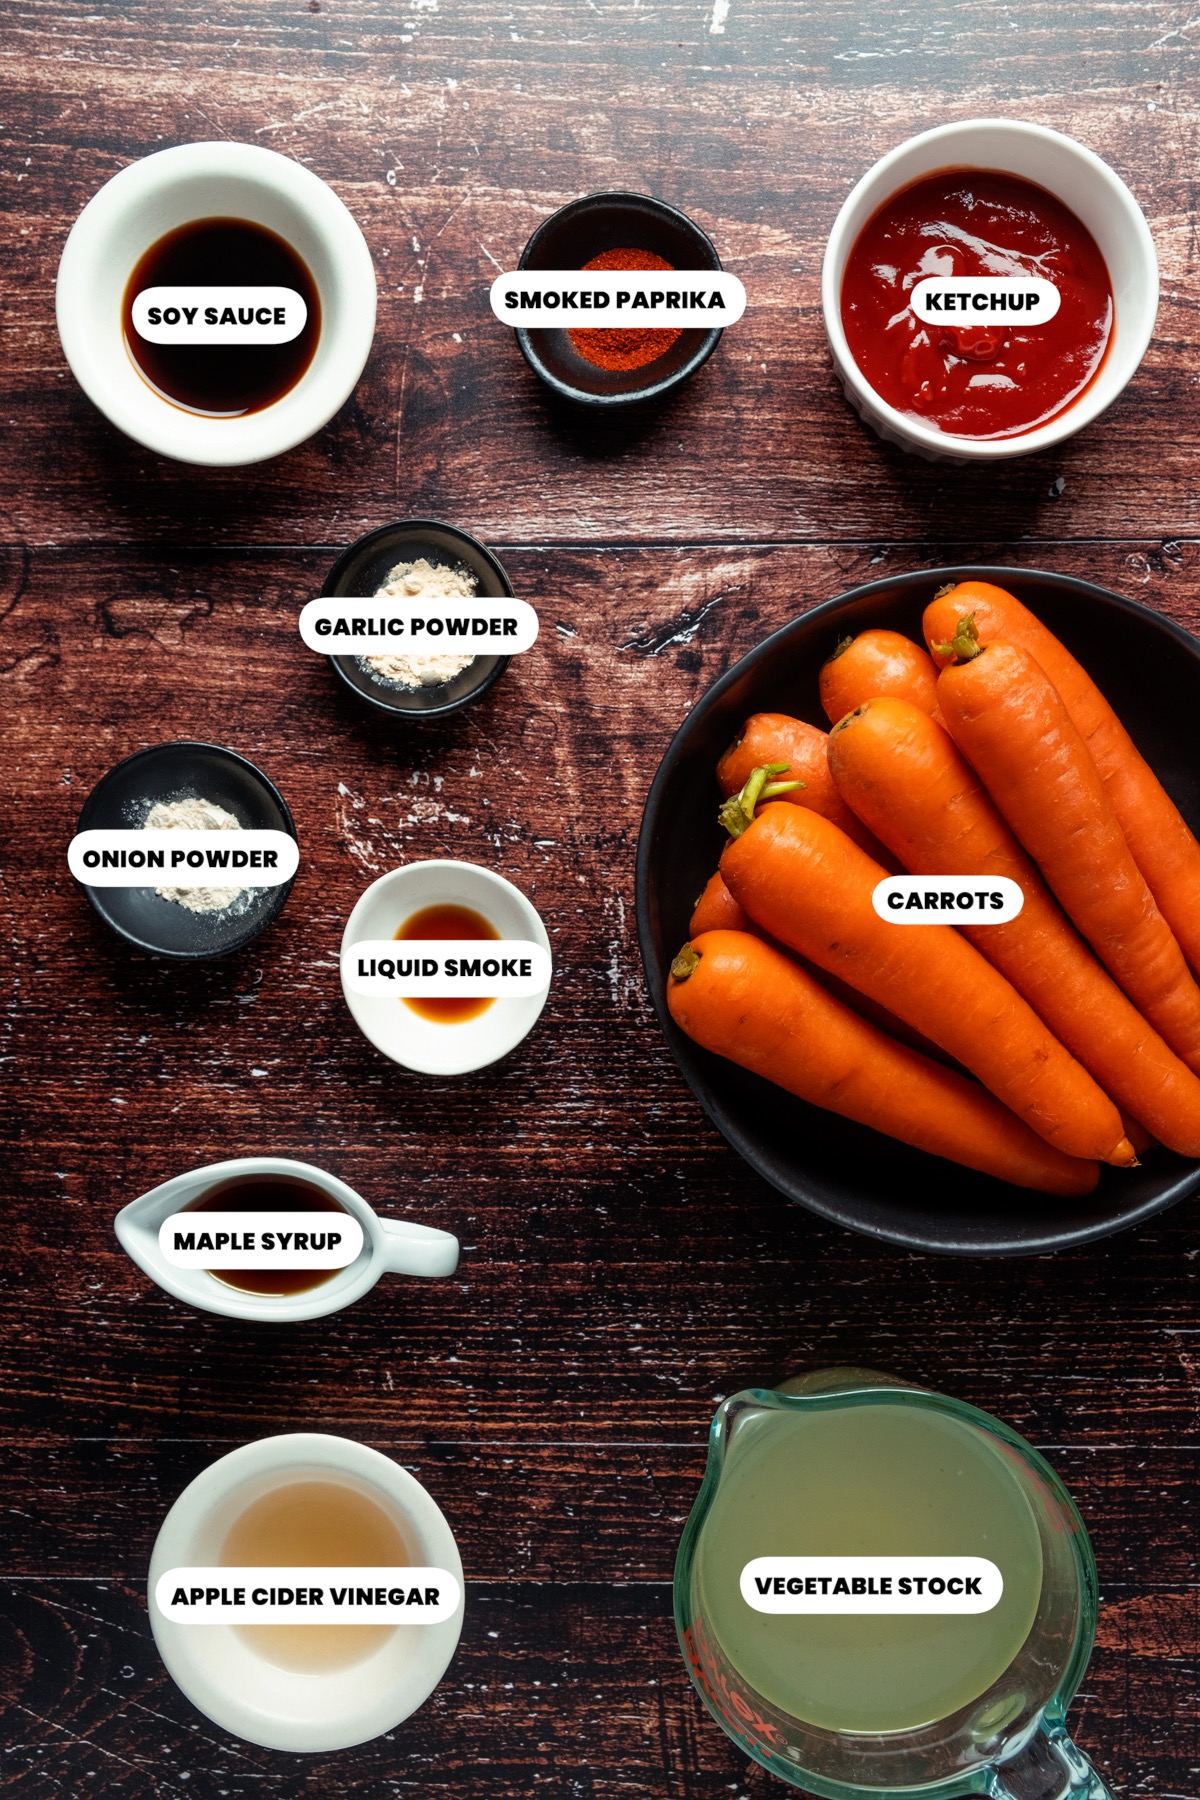 Ingredients for carrot dogs.